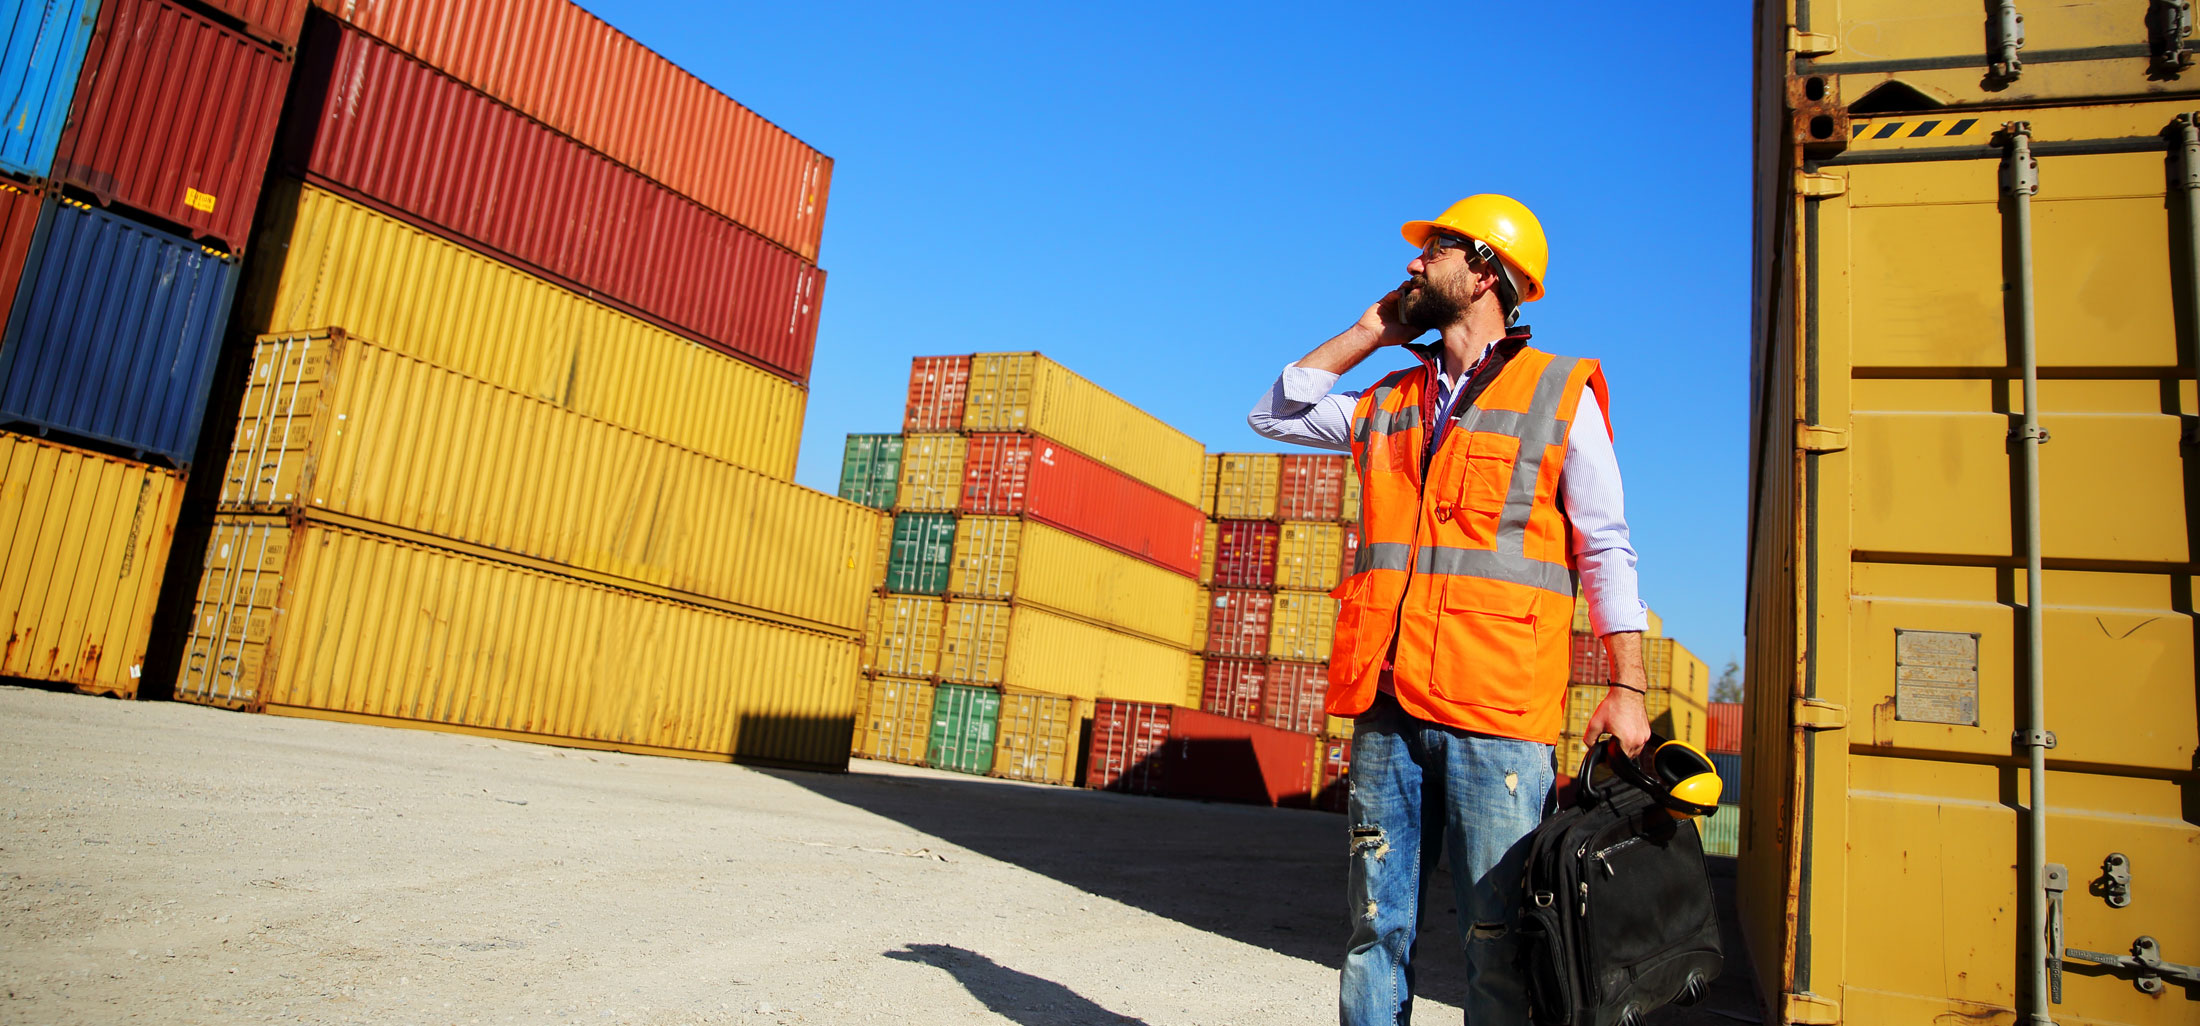 Customs officer on the phone while standing amongst shipping freight containers at a dock yard.